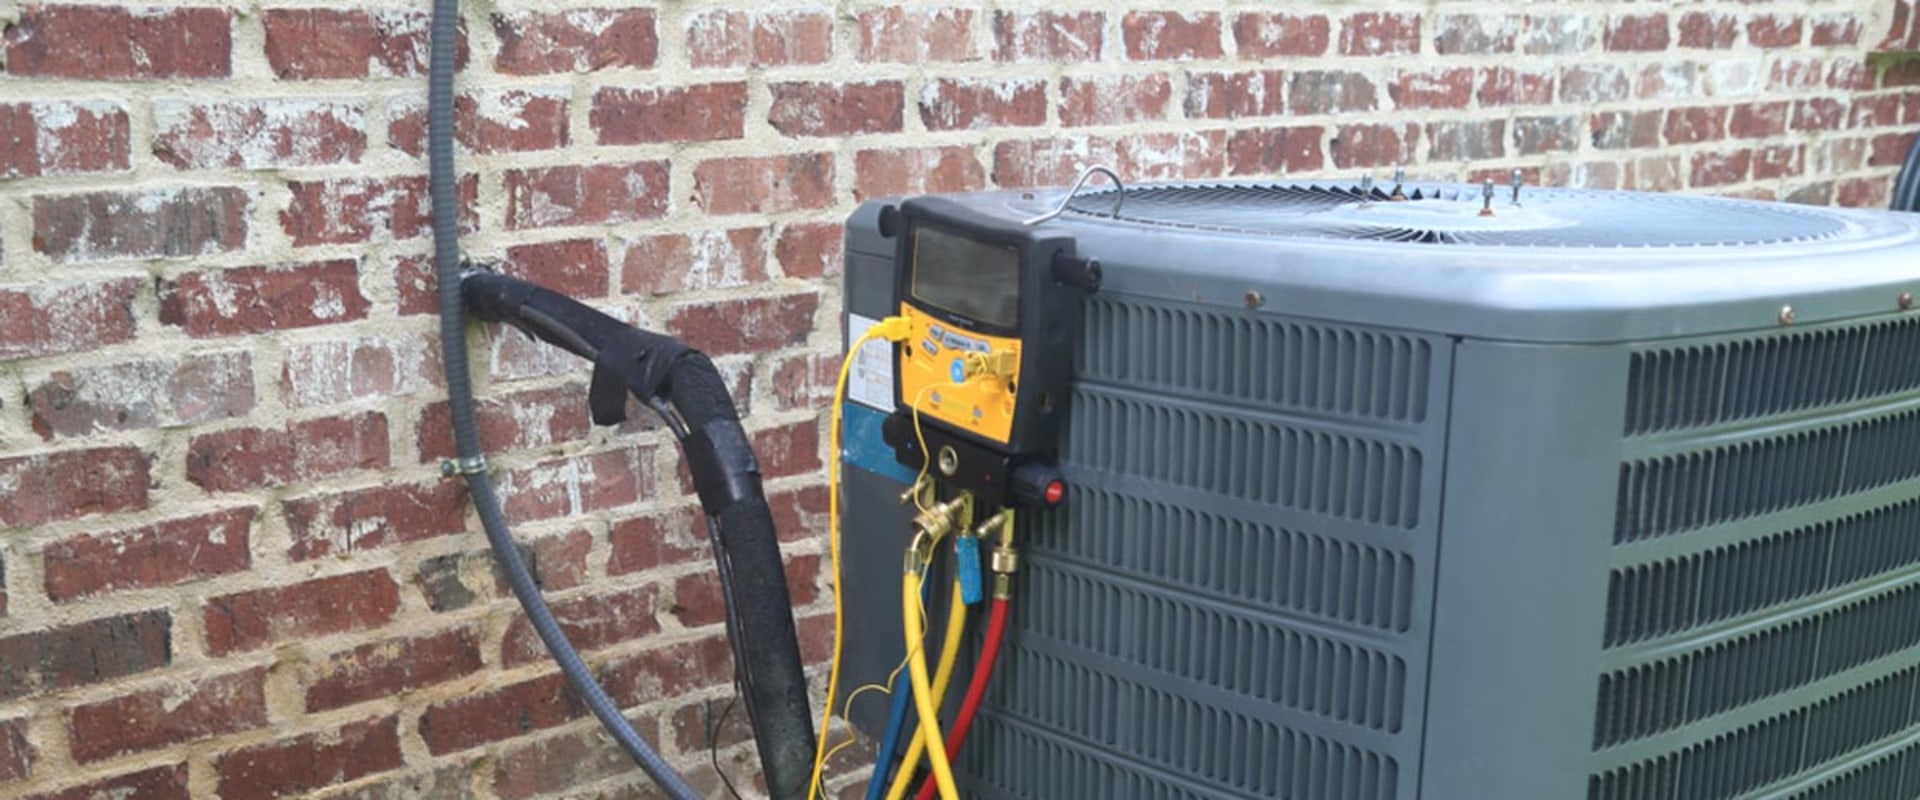 How much is hvac service?